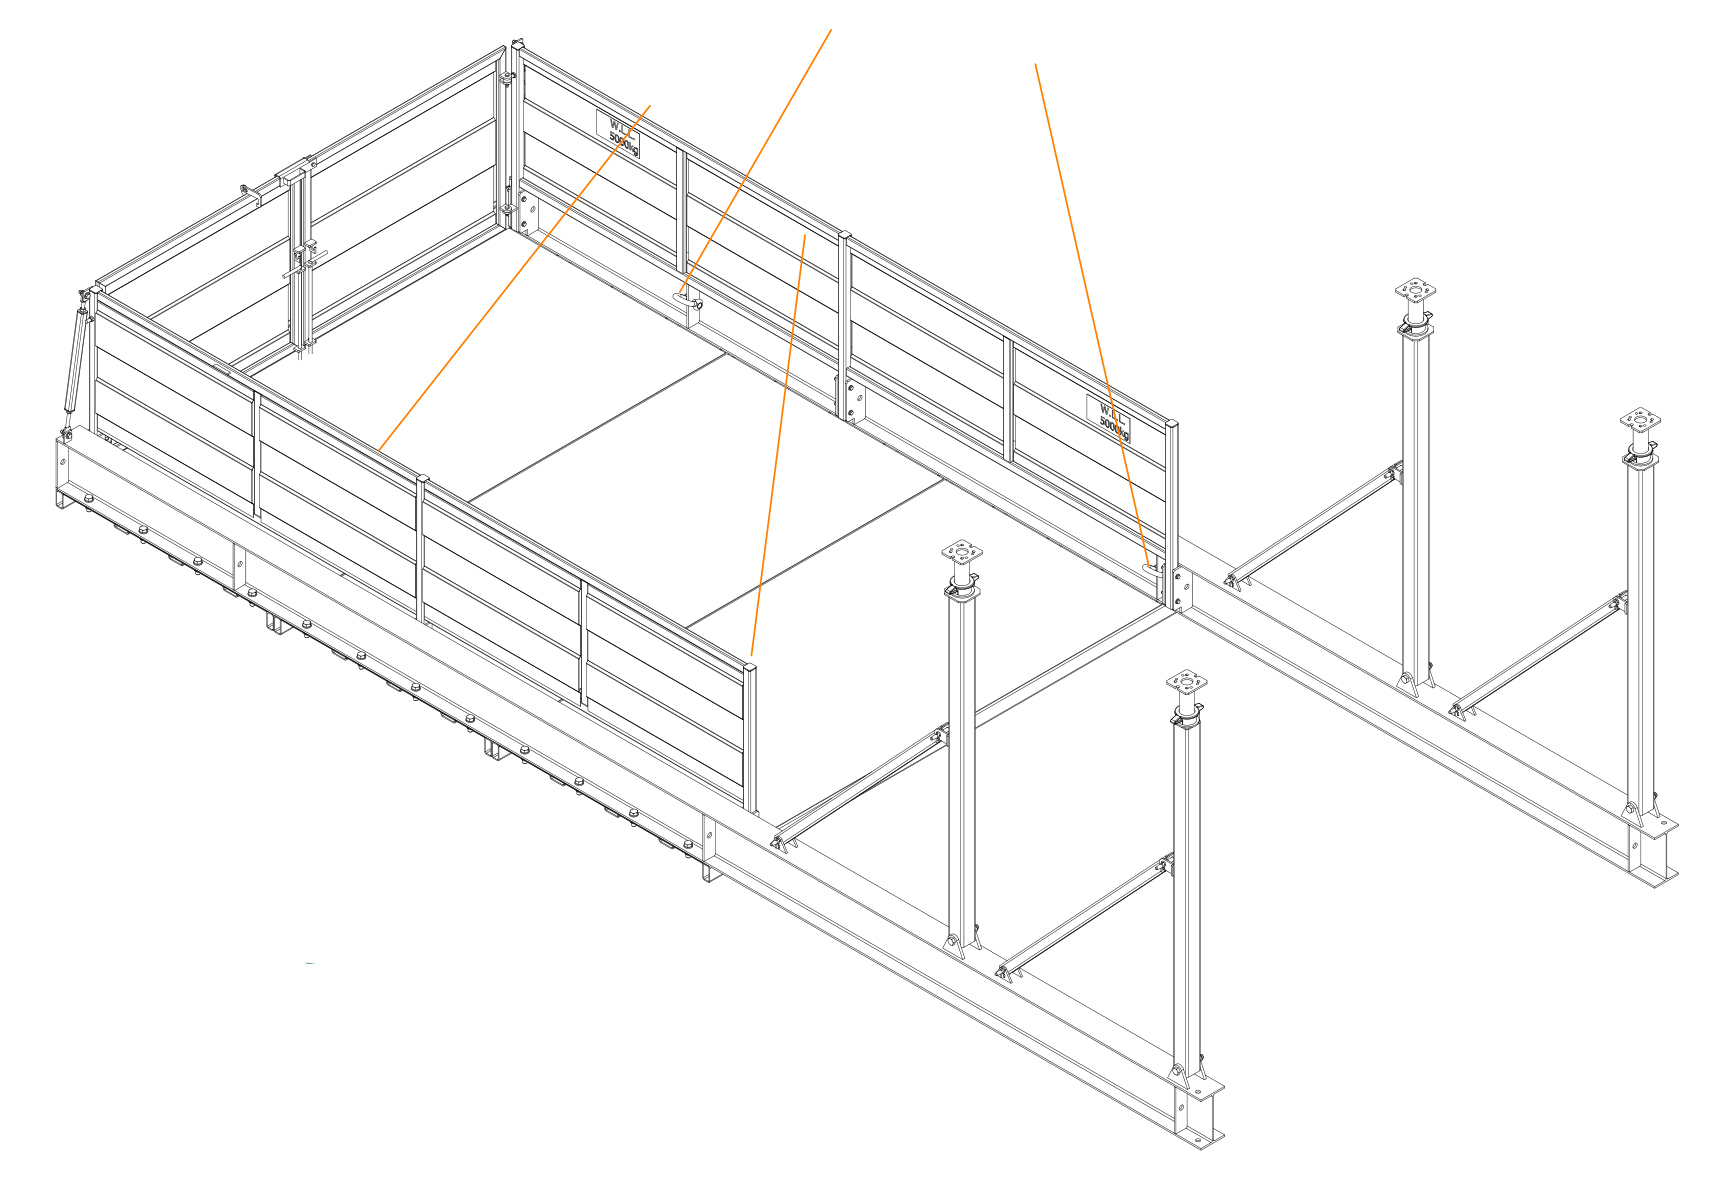 Fixed Cantilever wireframe